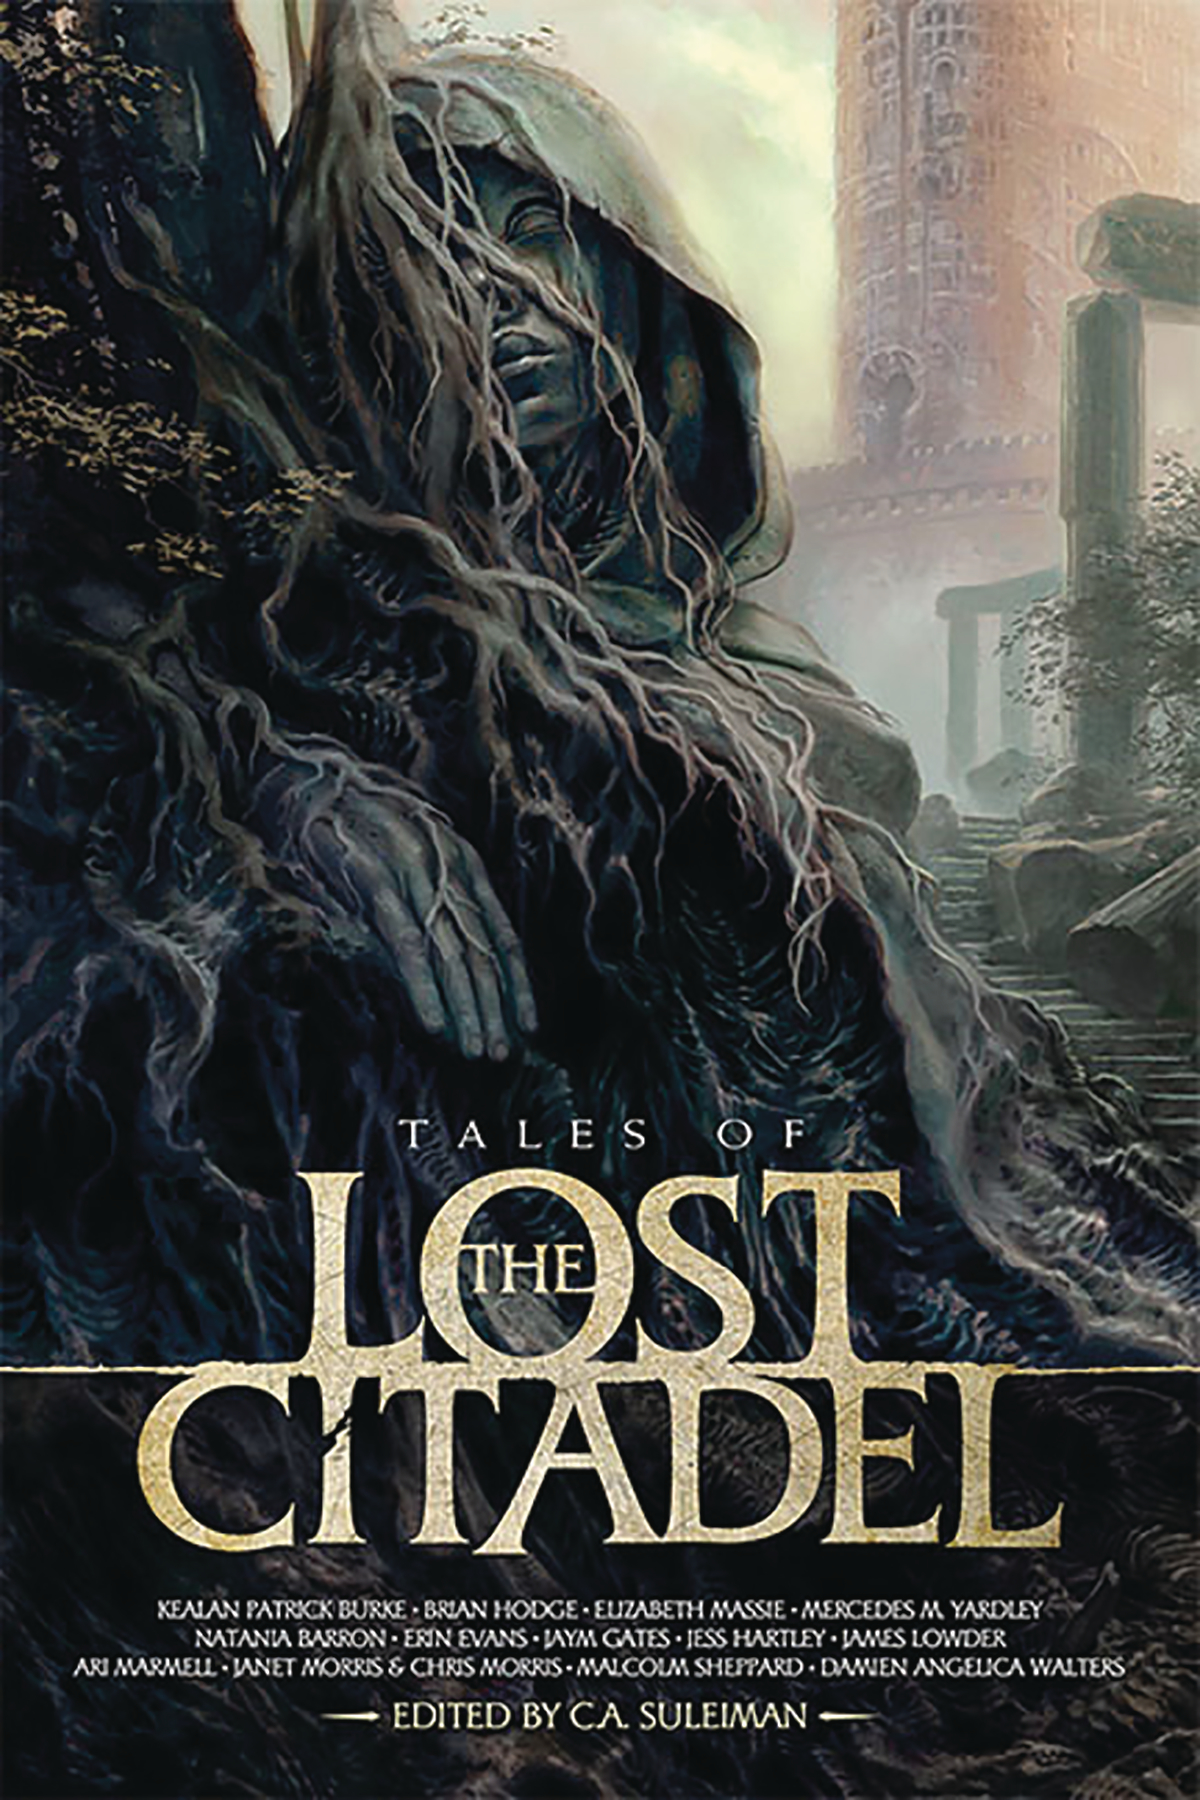 TALES OF THE LOST CITADEL PROSE ANTHOLOGY